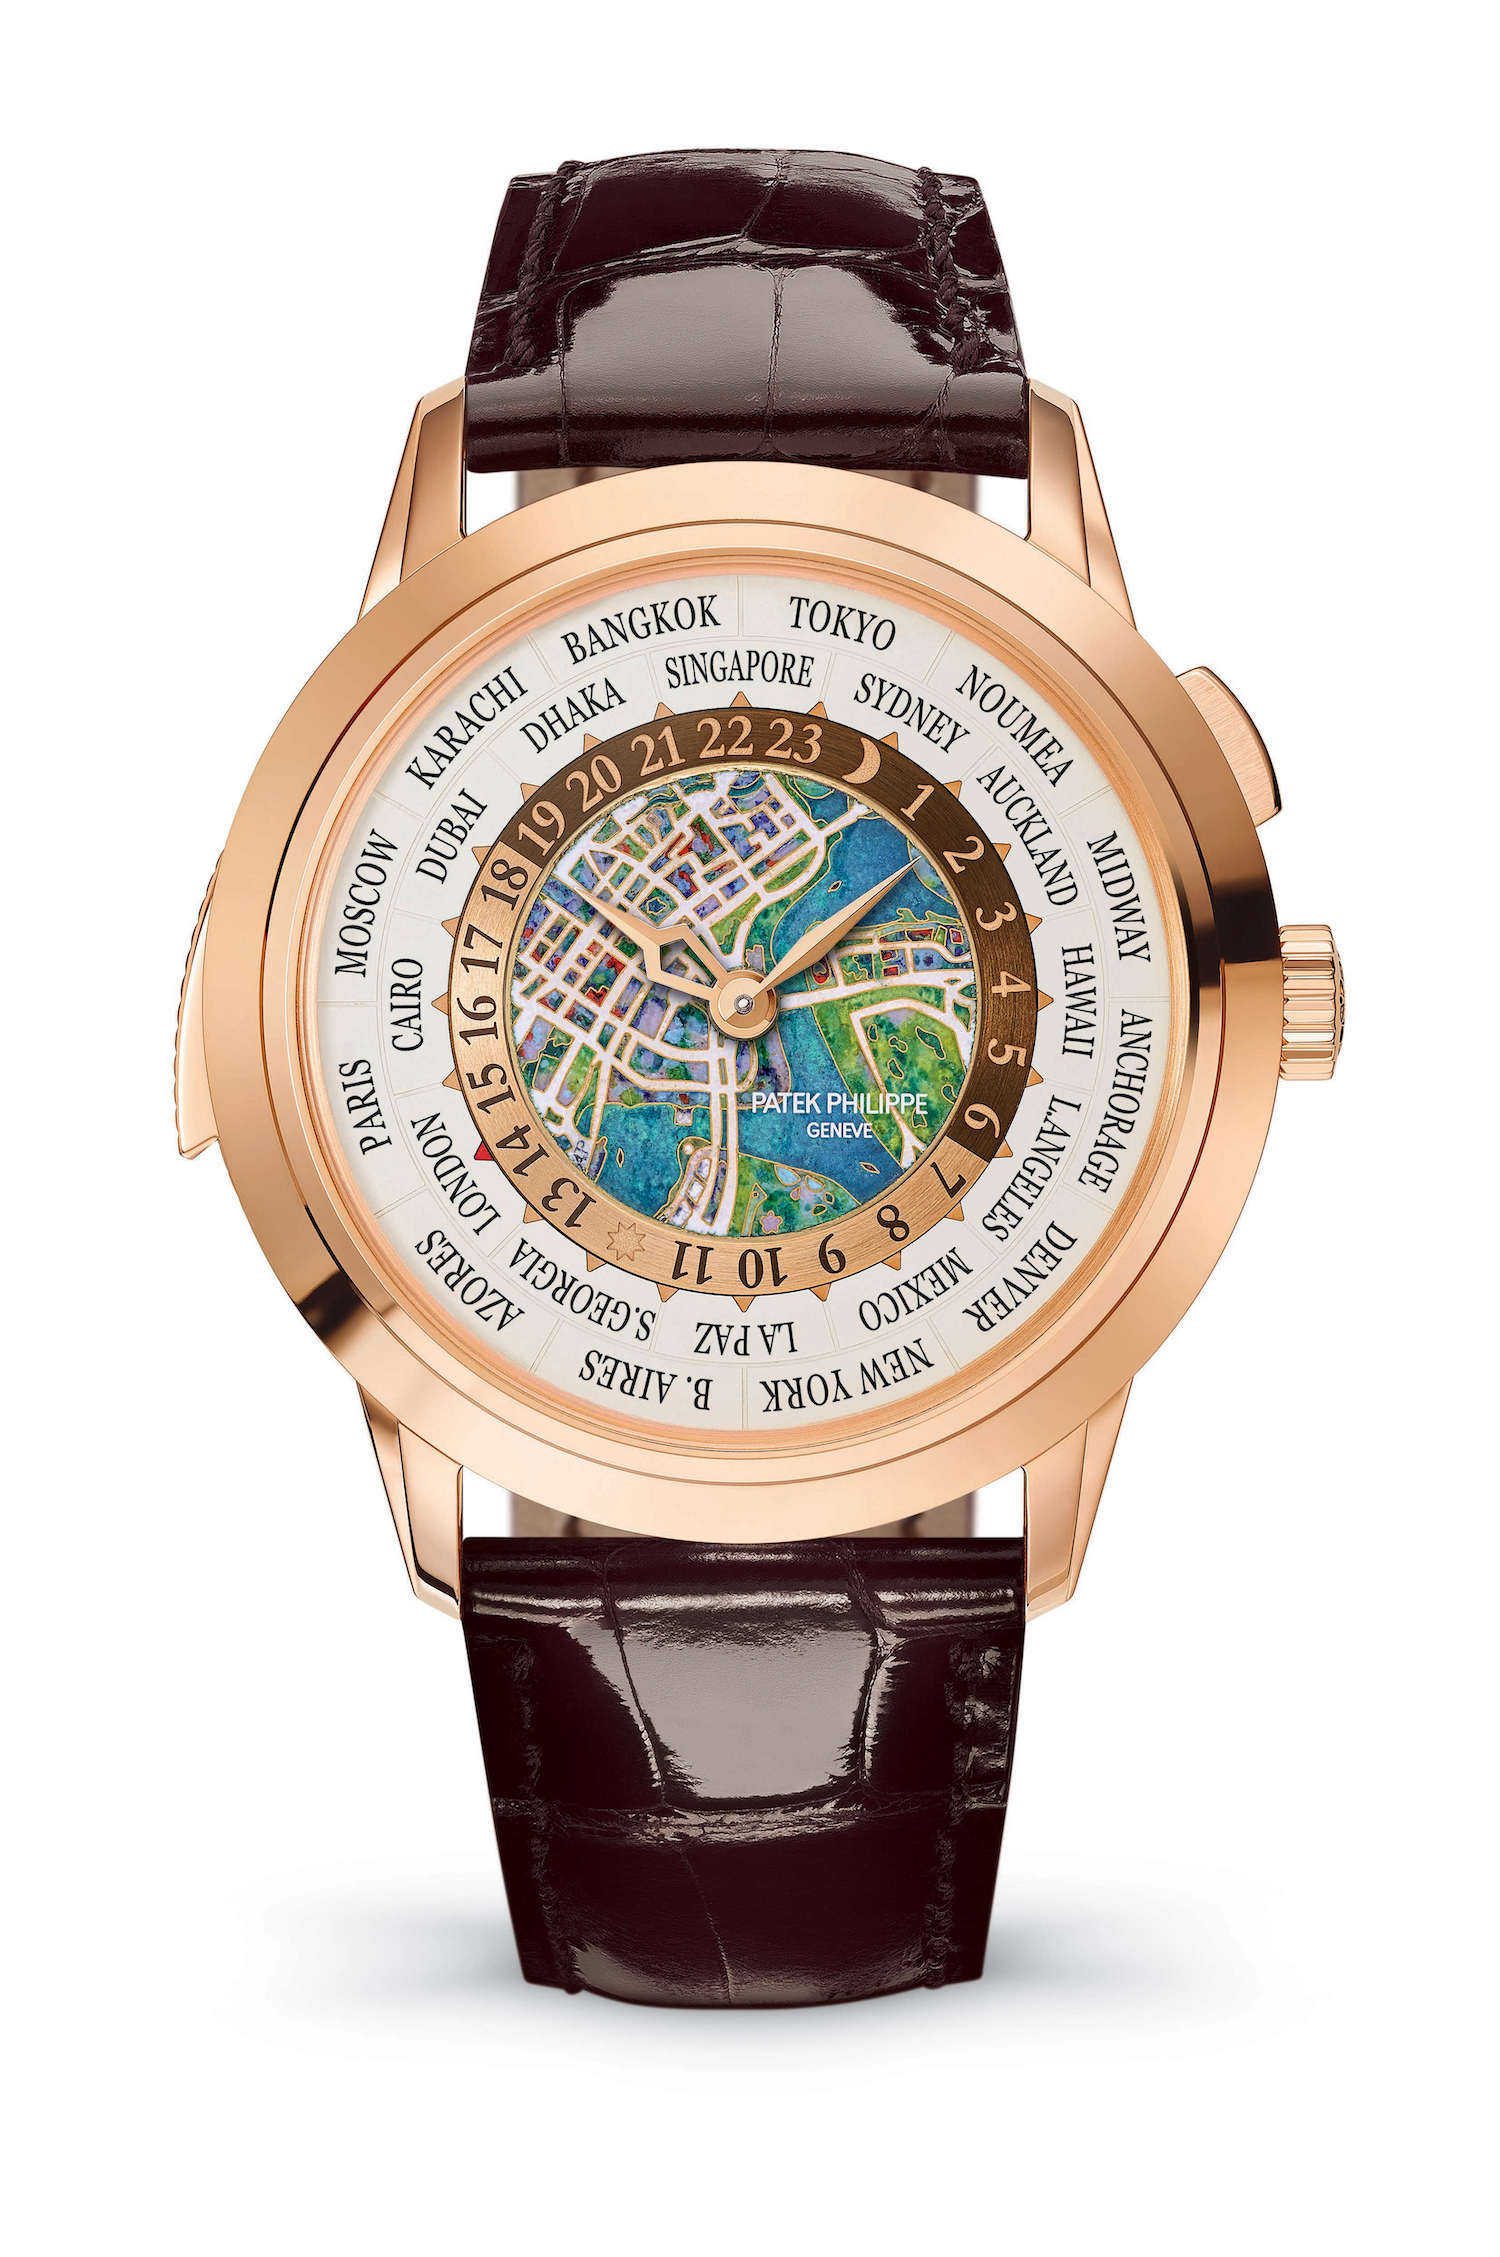 Patek Philippe World Time Minute Repeater Singapore 2019 Special Edition